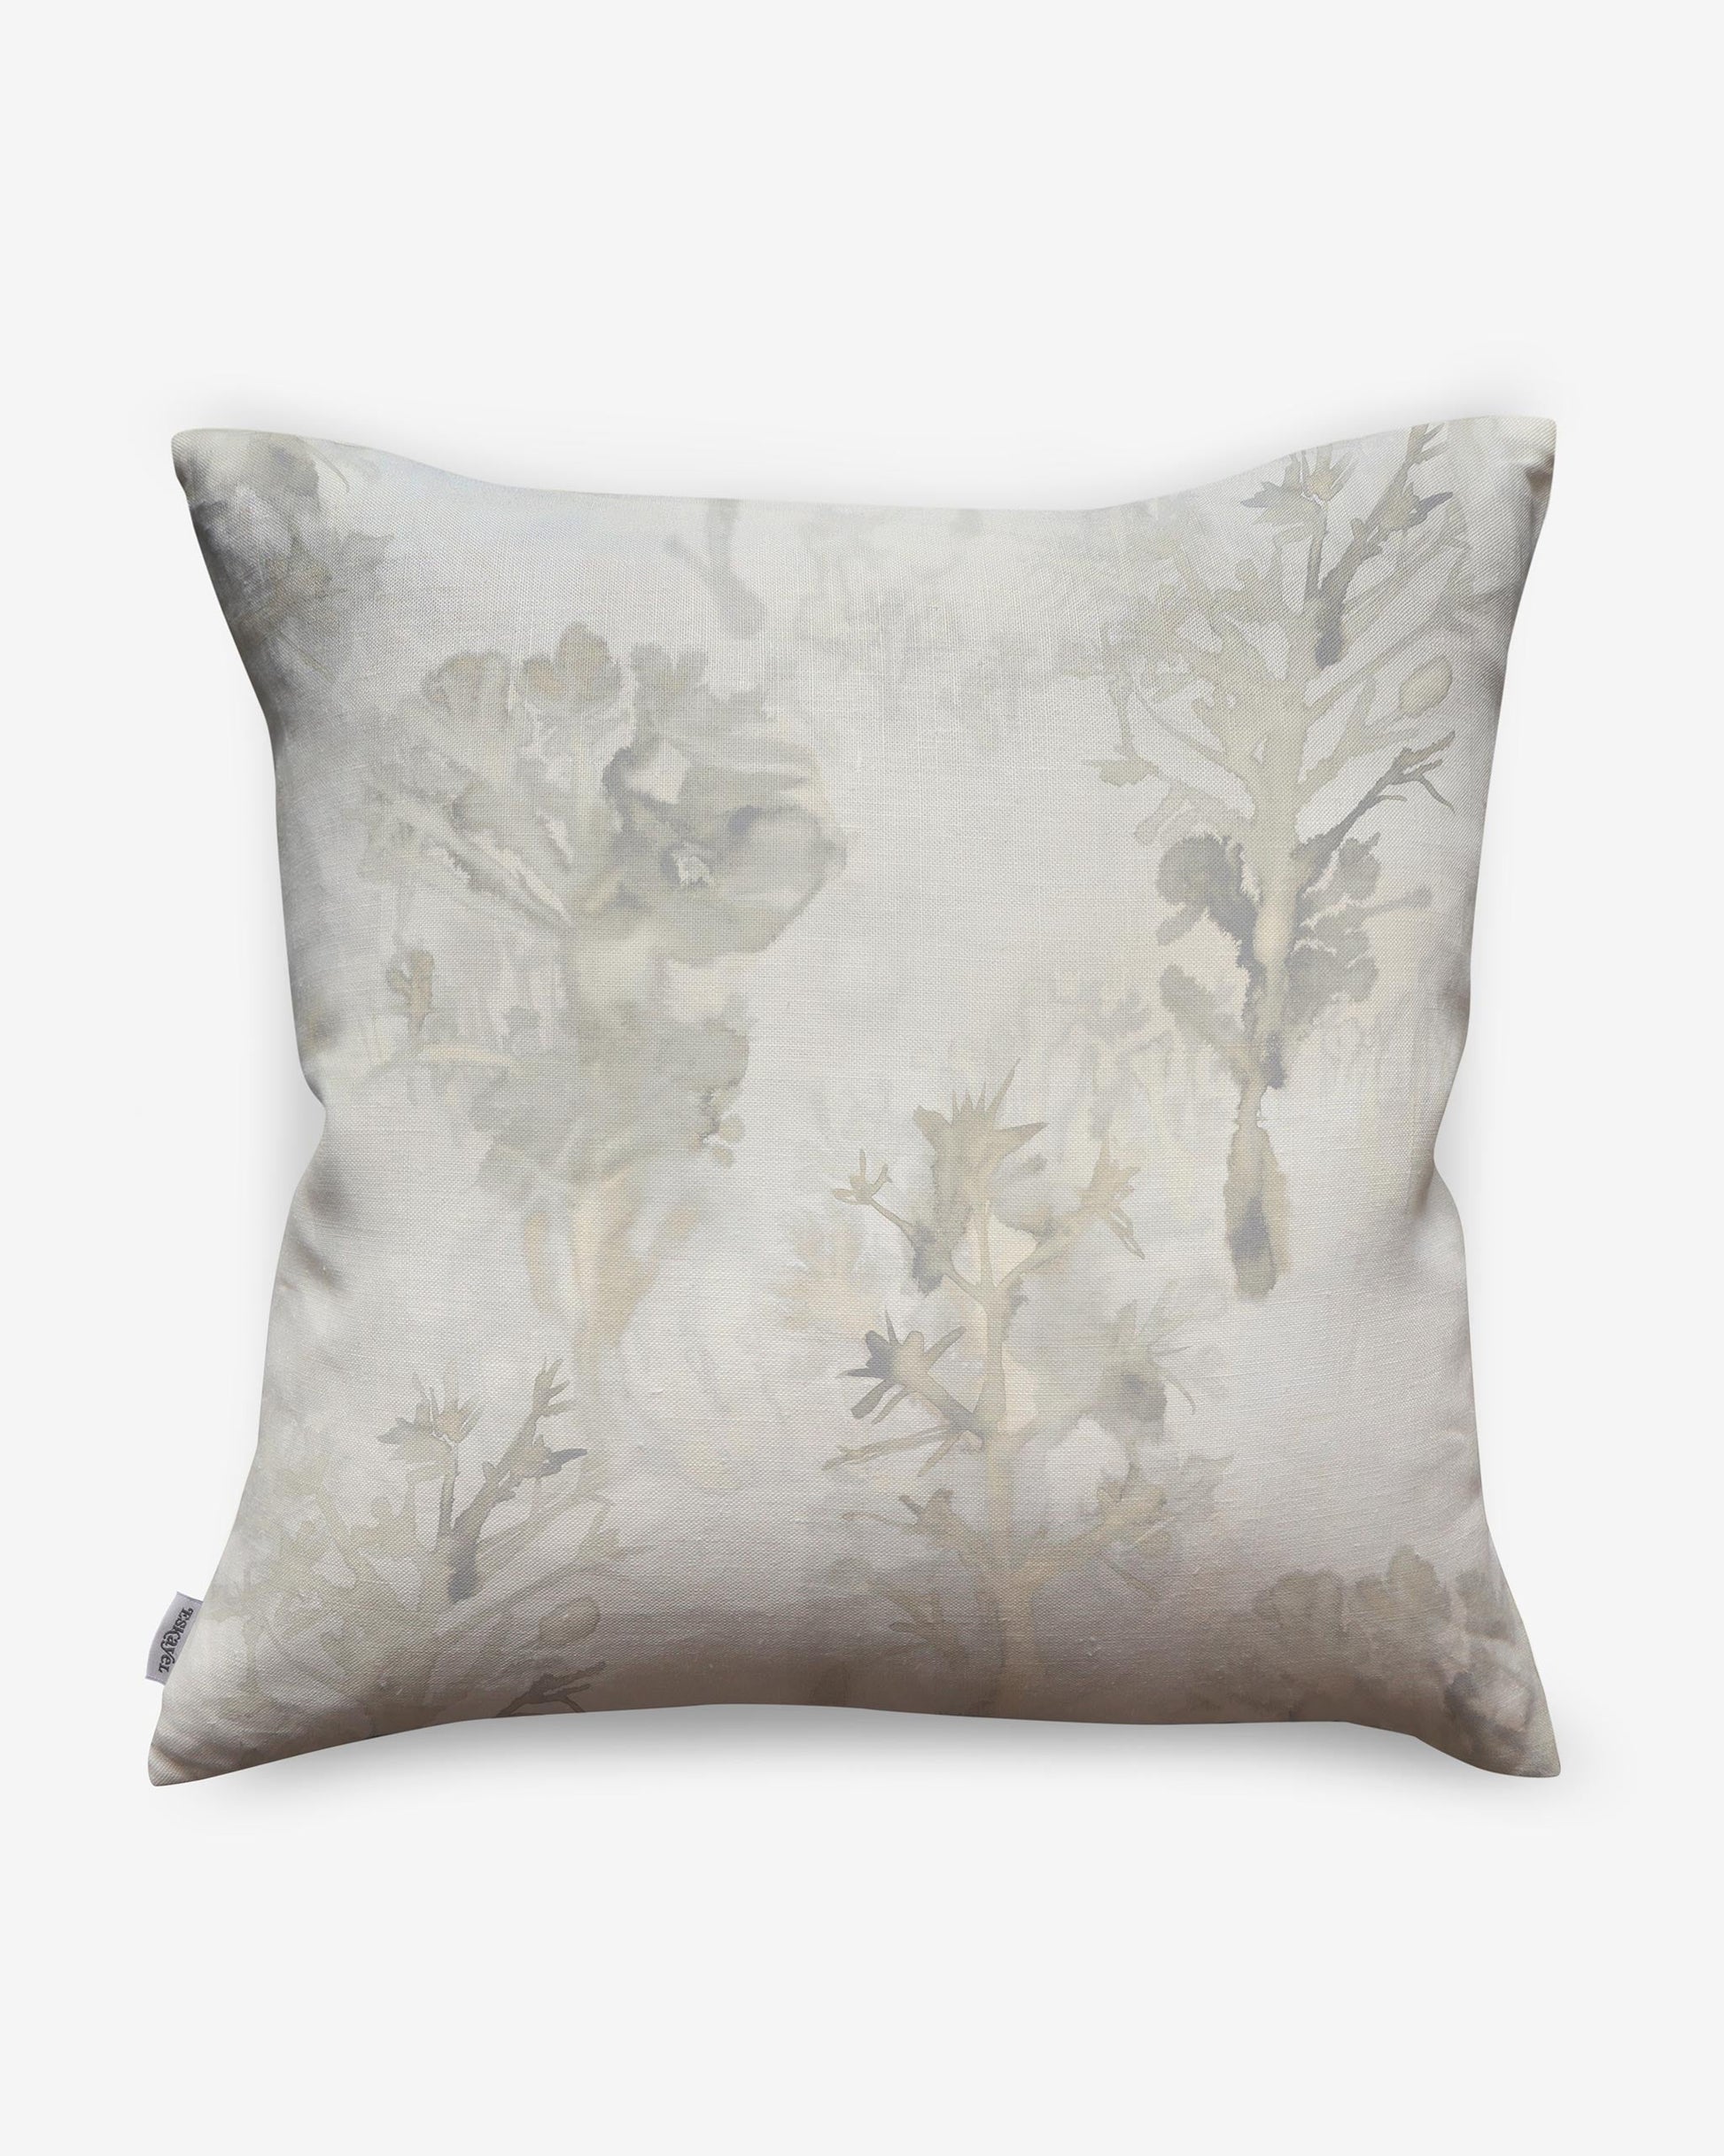 A Aionas Pillow Sol with a white and grey floral pattern